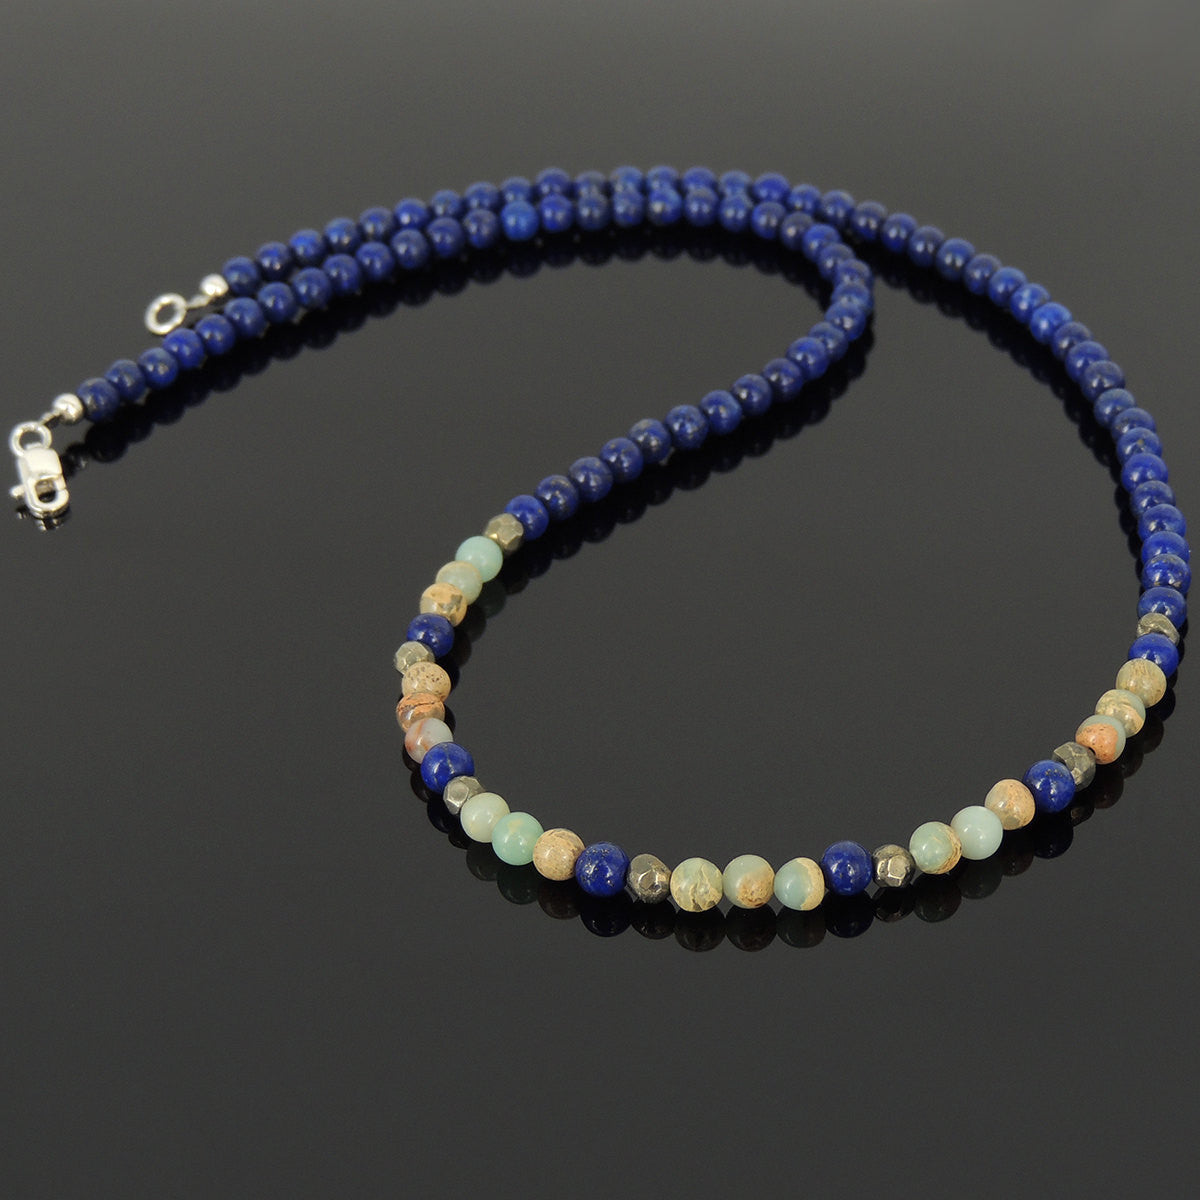 4mm Lapis Lazuli, Jasper Stone, & Faceted Gold Pyrite Healing Gemstone Necklace with S925 Sterling Silver Clasp - Handmade by Gem & Silver NK064